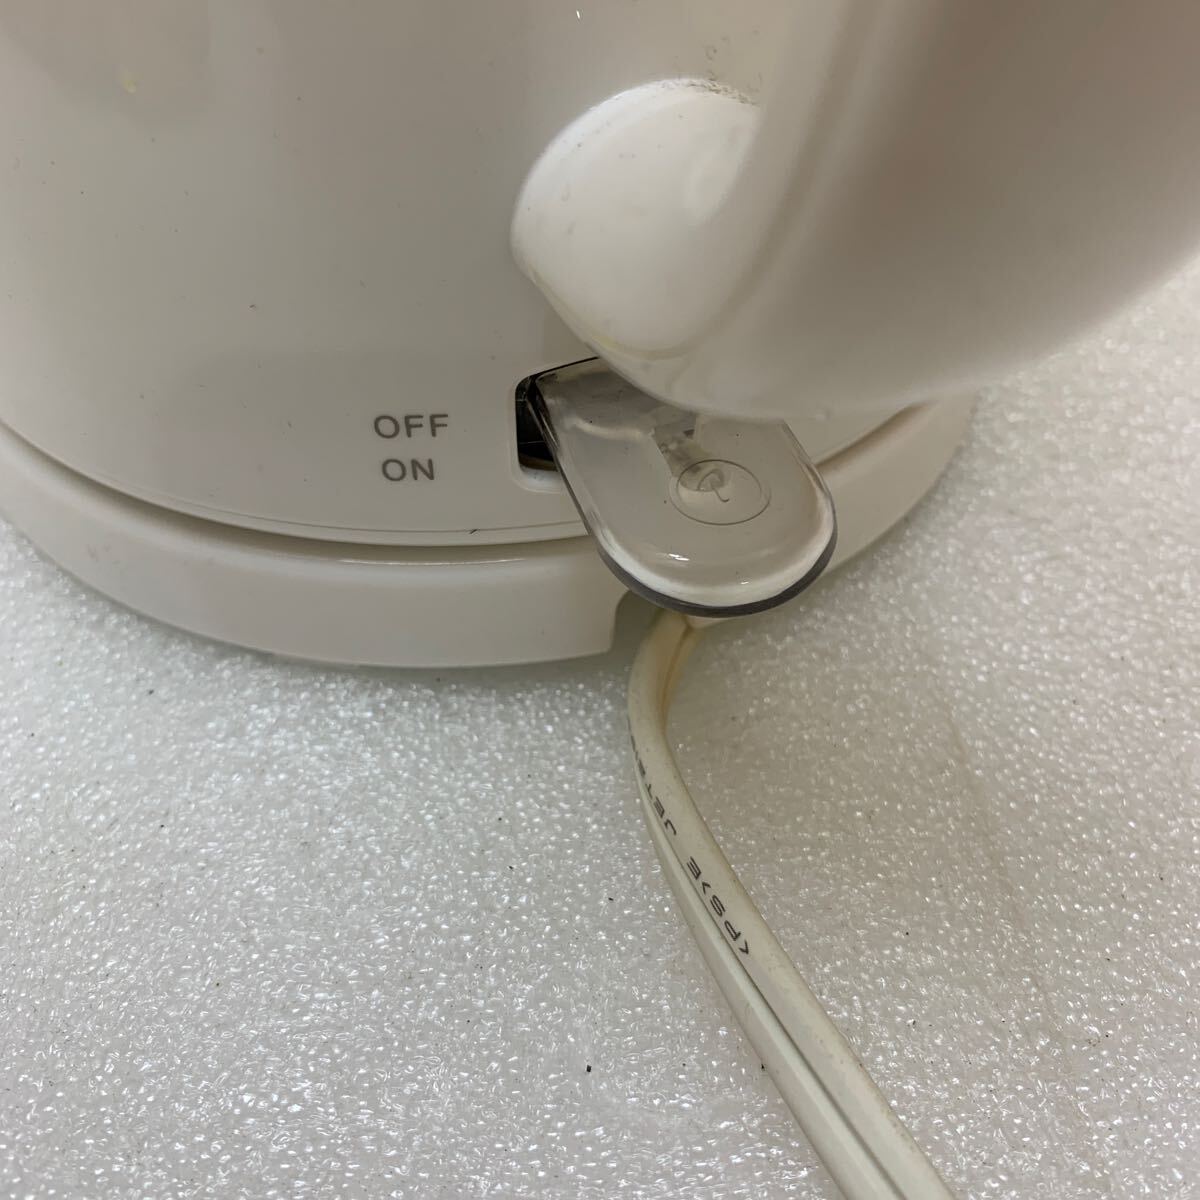 MK6001 electric kettle electric DAY Value hot water ... operation verification ..20240508